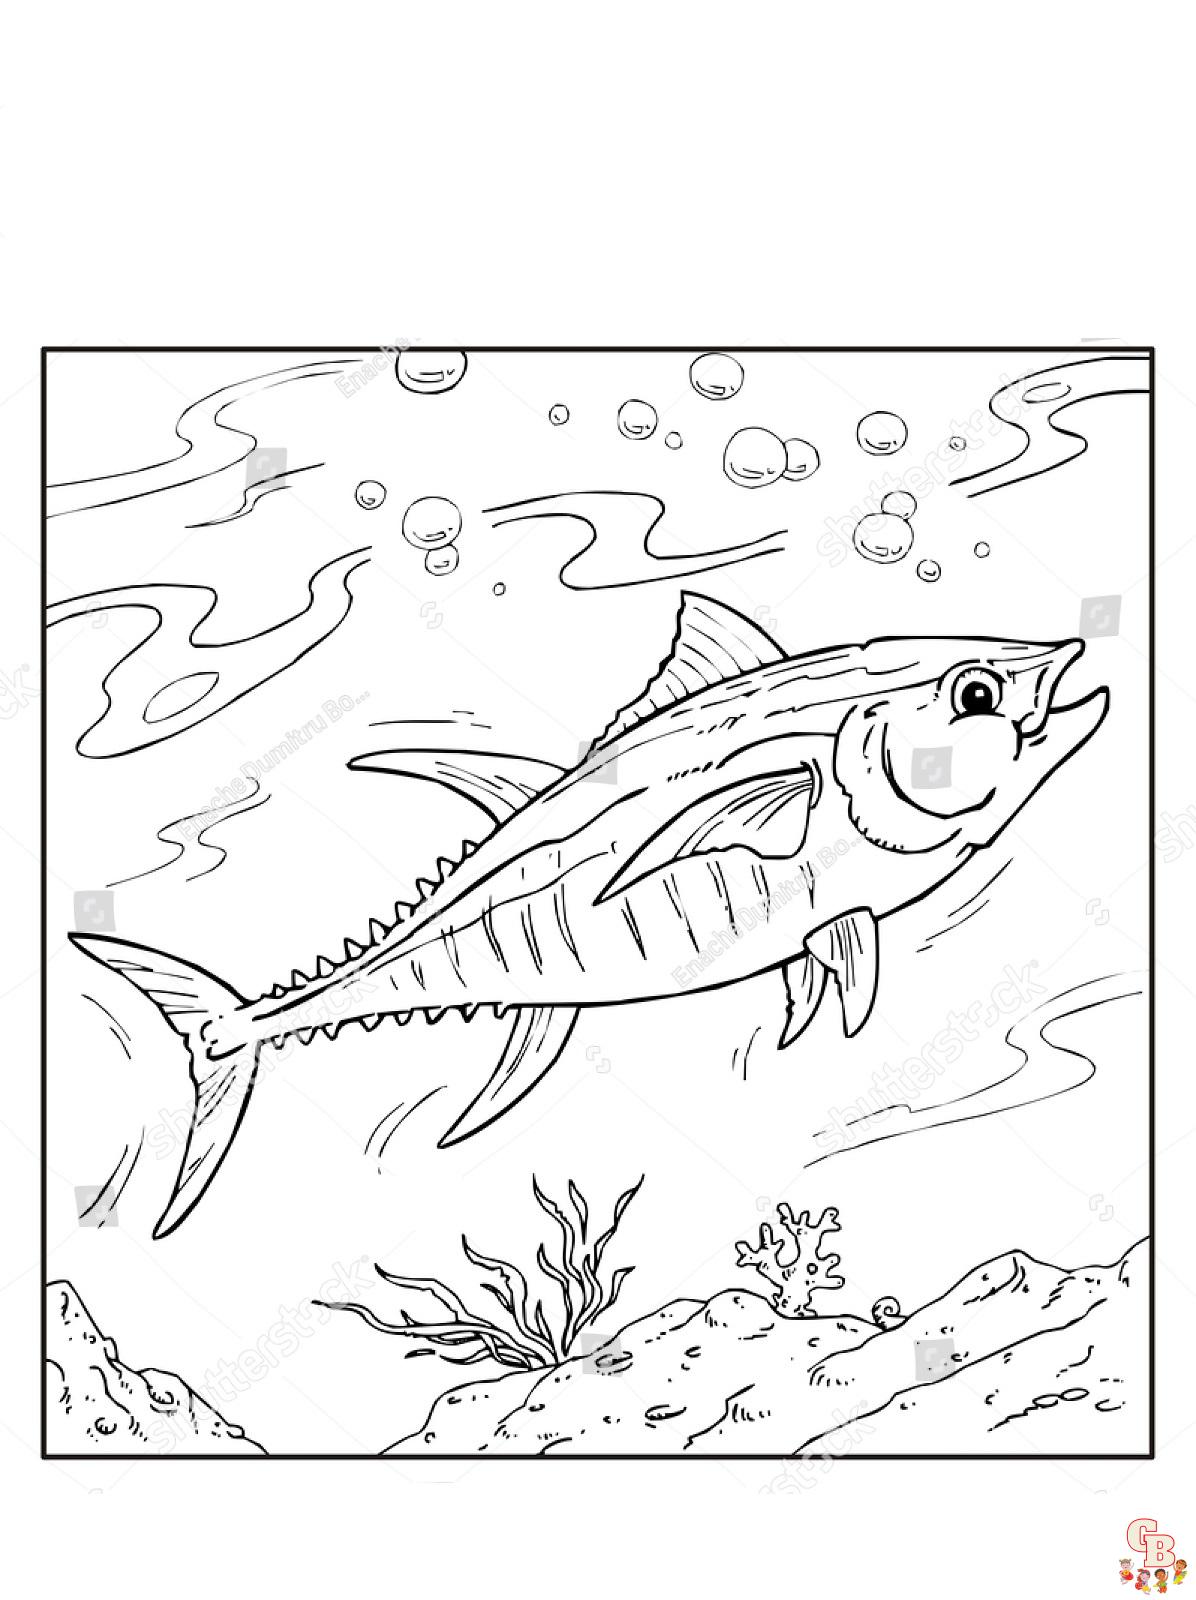 Dive into the Ocean World with Tuna Fish Coloring Pages